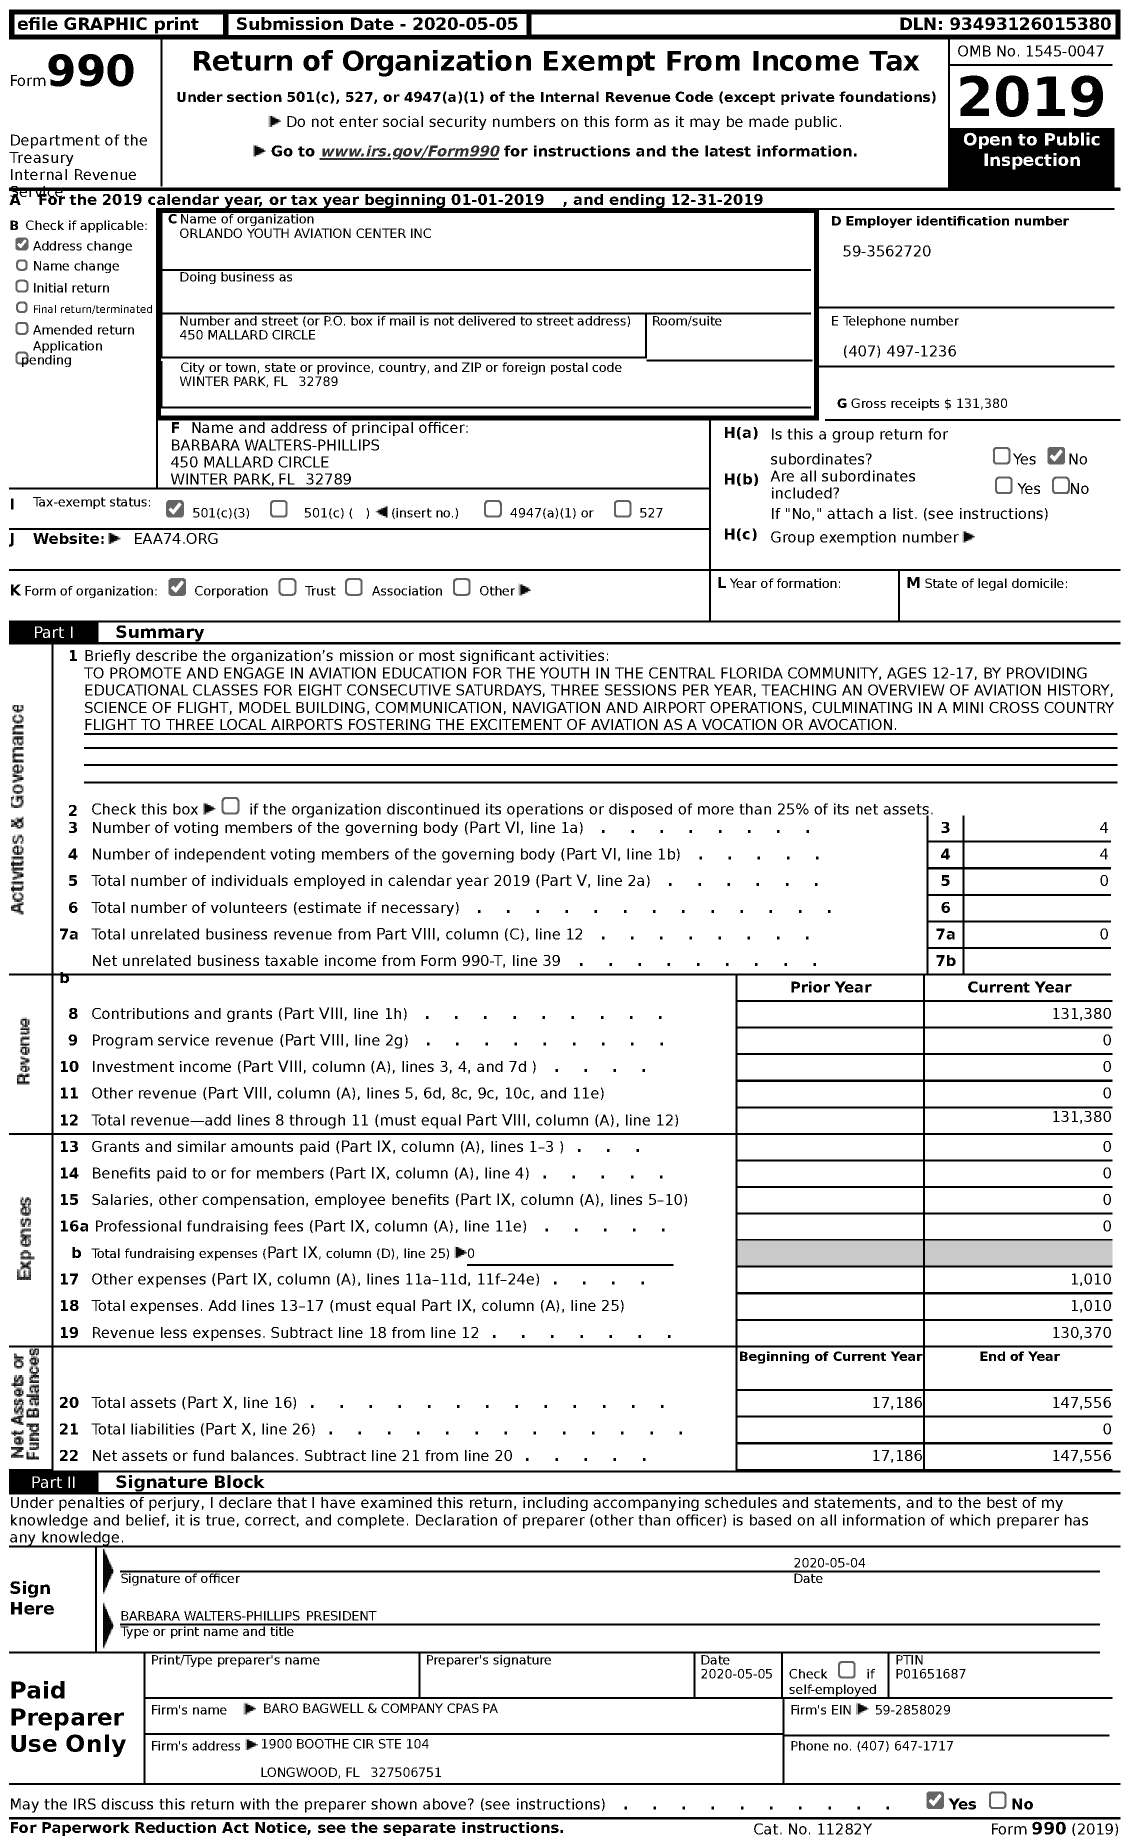 Image of first page of 2019 Form 990 for Orlando Youth Aviation Center